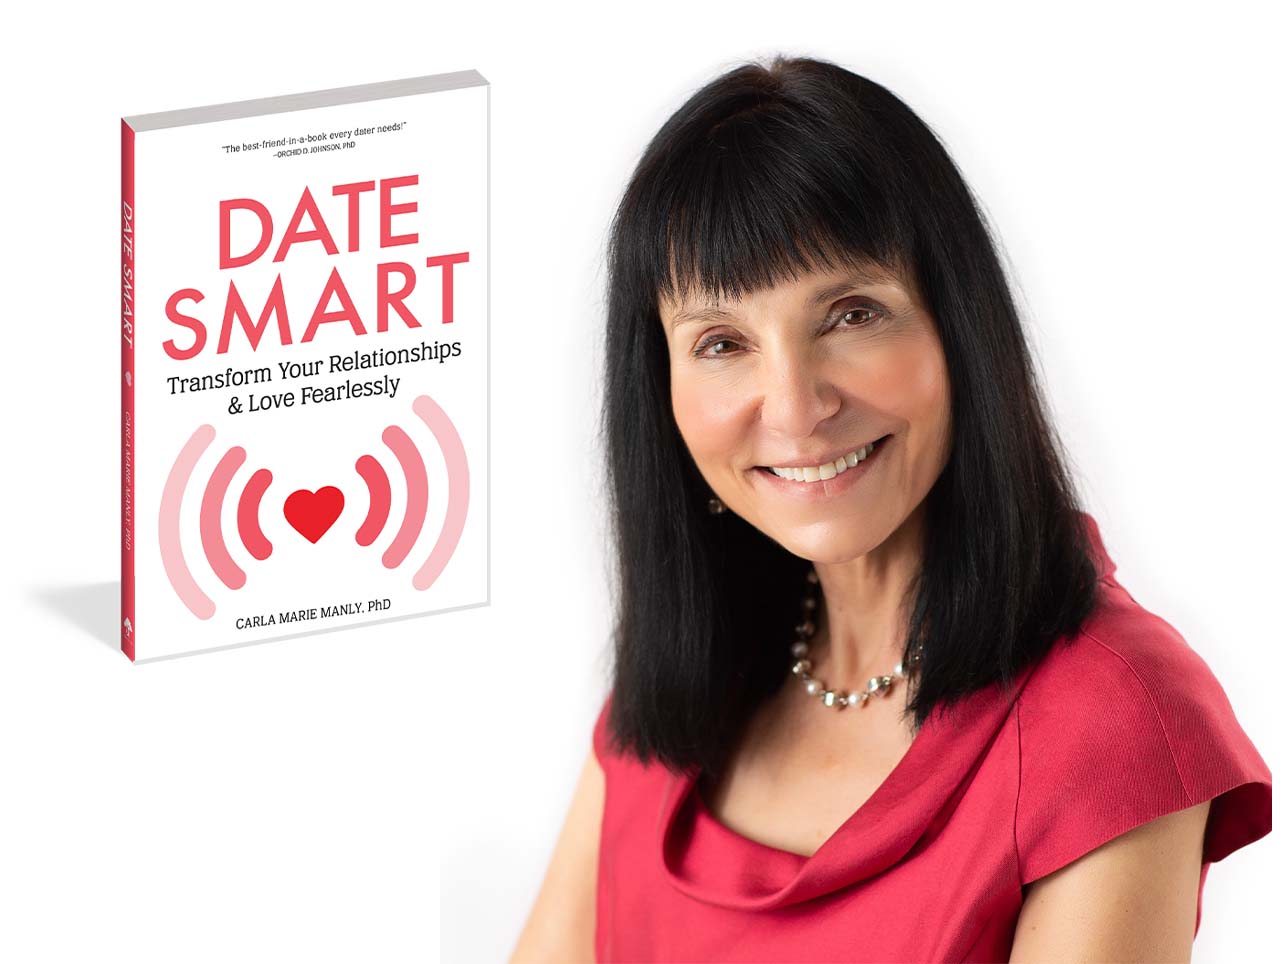 Date Smart: Transform Your Relationships and Love Fearlessly by Dr. Carla Marie Manly offers an inspired and practical approach to creating healthy, sustainable relationships